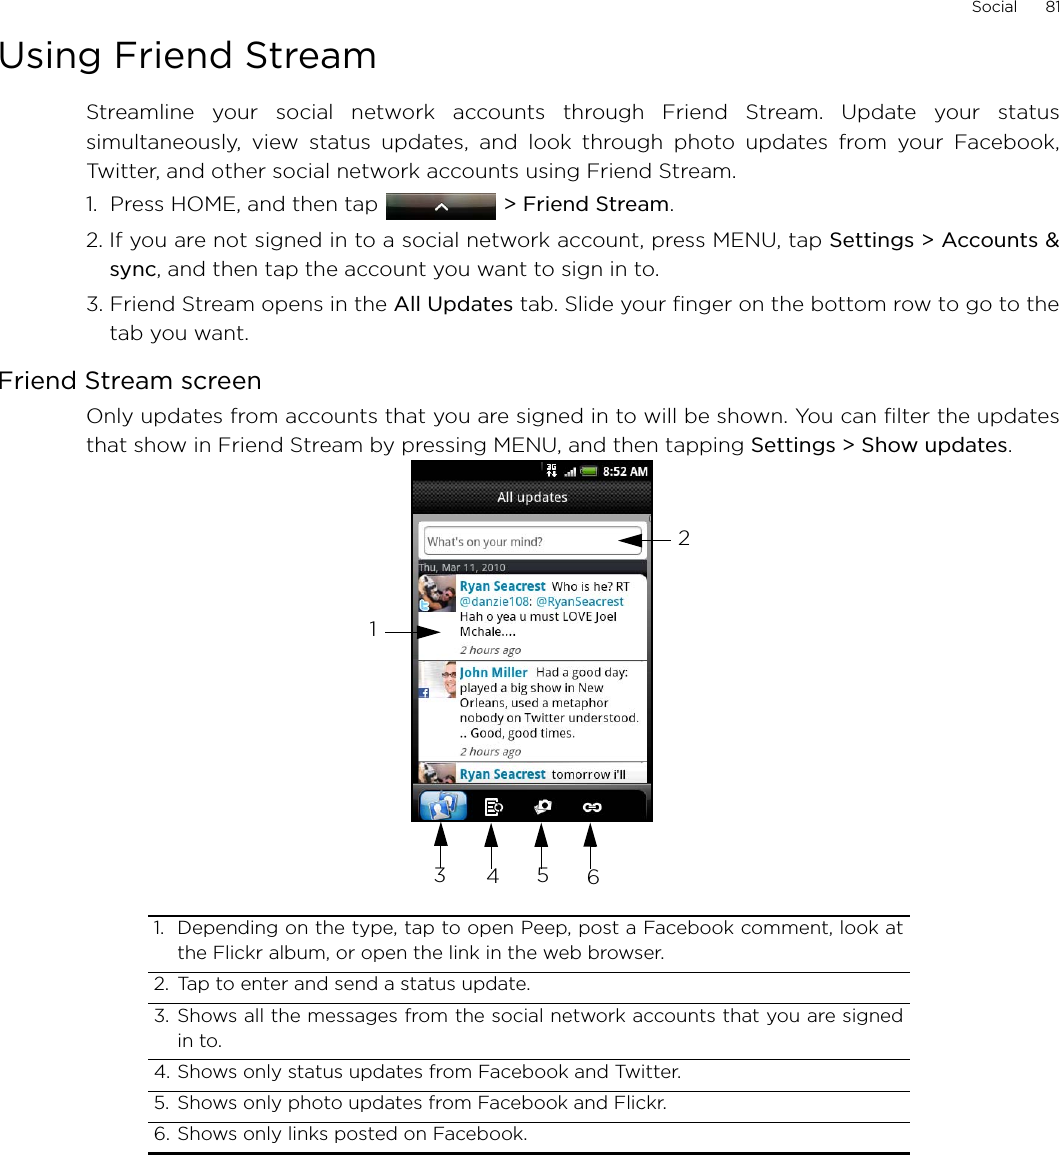 Social      81Using Friend StreamStreamline your social network accounts through Friend Stream. Update your statussimultaneously, view status updates, and look through photo updates from your Facebook,Twitter, and other social network accounts using Friend Stream. 1.  Press HOME, and then tap  &gt; Friend Stream.2. If you are not signed in to a social network account, press MENU, tap Settings &gt; Accounts &amp;sync, and then tap the account you want to sign in to.3. Friend Stream opens in the All Updates tab. Slide your finger on the bottom row to go to thetab you want.Friend Stream screenOnly updates from accounts that you are signed in to will be shown. You can filter the updatesthat show in Friend Stream by pressing MENU, and then tapping Settings &gt; Show updates.1. Depending on the type, tap to open Peep, post a Facebook comment, look atthe Flickr album, or open the link in the web browser. 2. Tap to enter and send a status update. 3. Shows all the messages from the social network accounts that you are signedin to.4. Shows only status updates from Facebook and Twitter. 5. Shows only photo updates from Facebook and Flickr. 6. Shows only links posted on Facebook. 123456